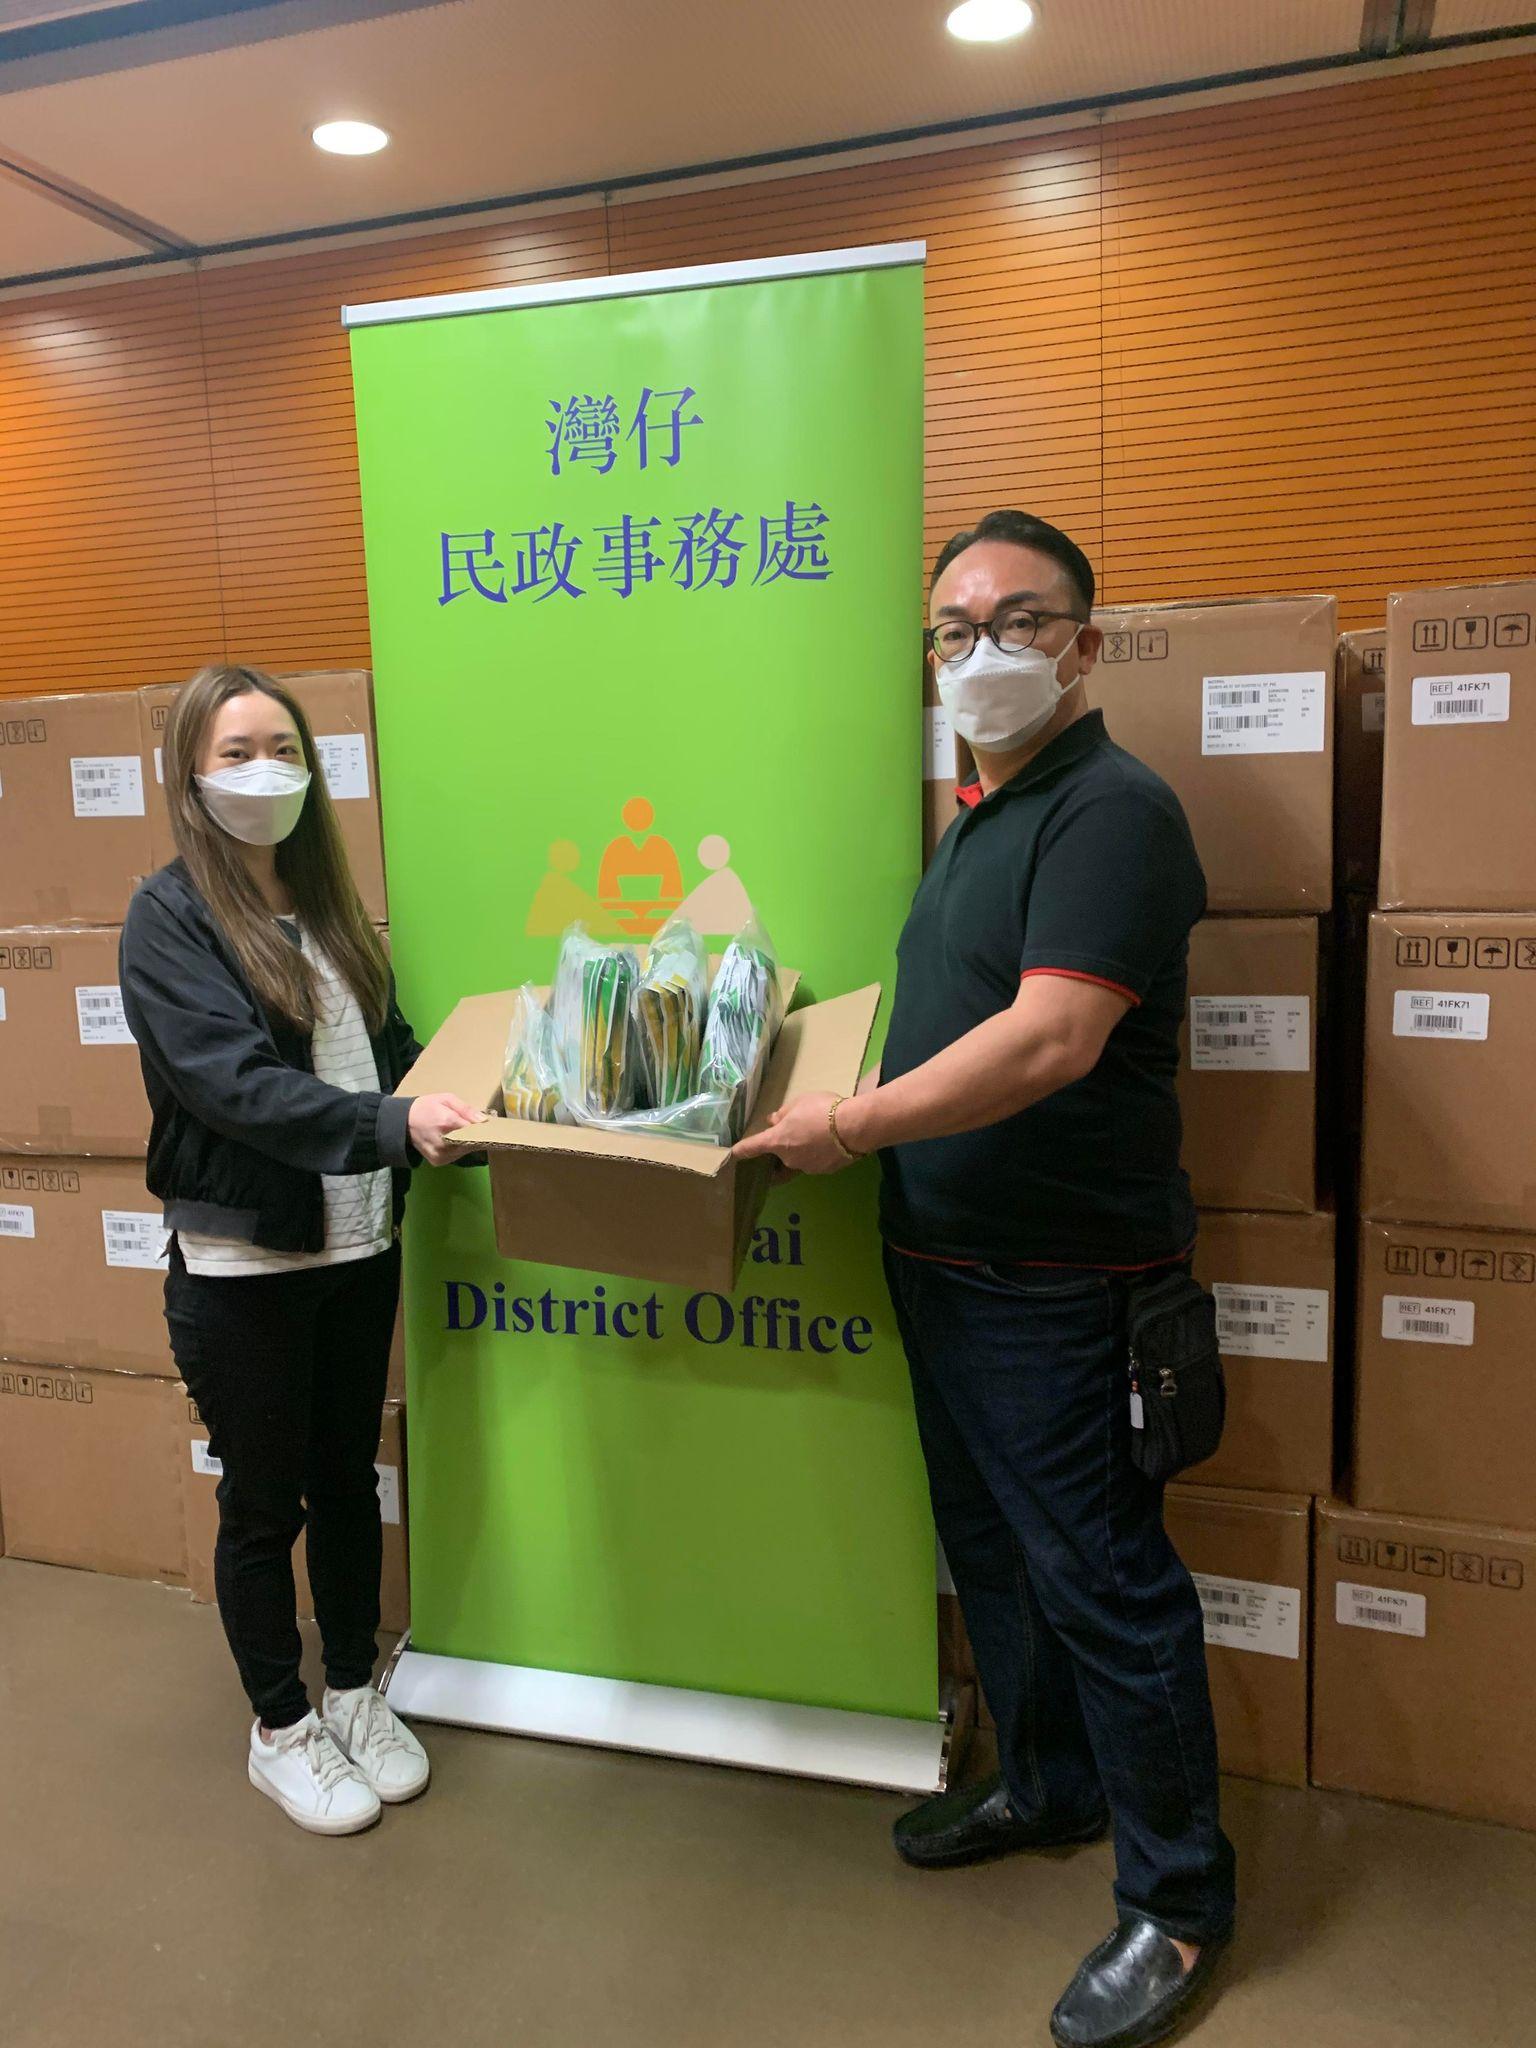 The Wan Chai District Office today (March 18) distributed COVID-19 rapid test kits to households, cleansing workers and property management staff living and working in Lai Tak Tsuen for voluntary testing through the property management company.